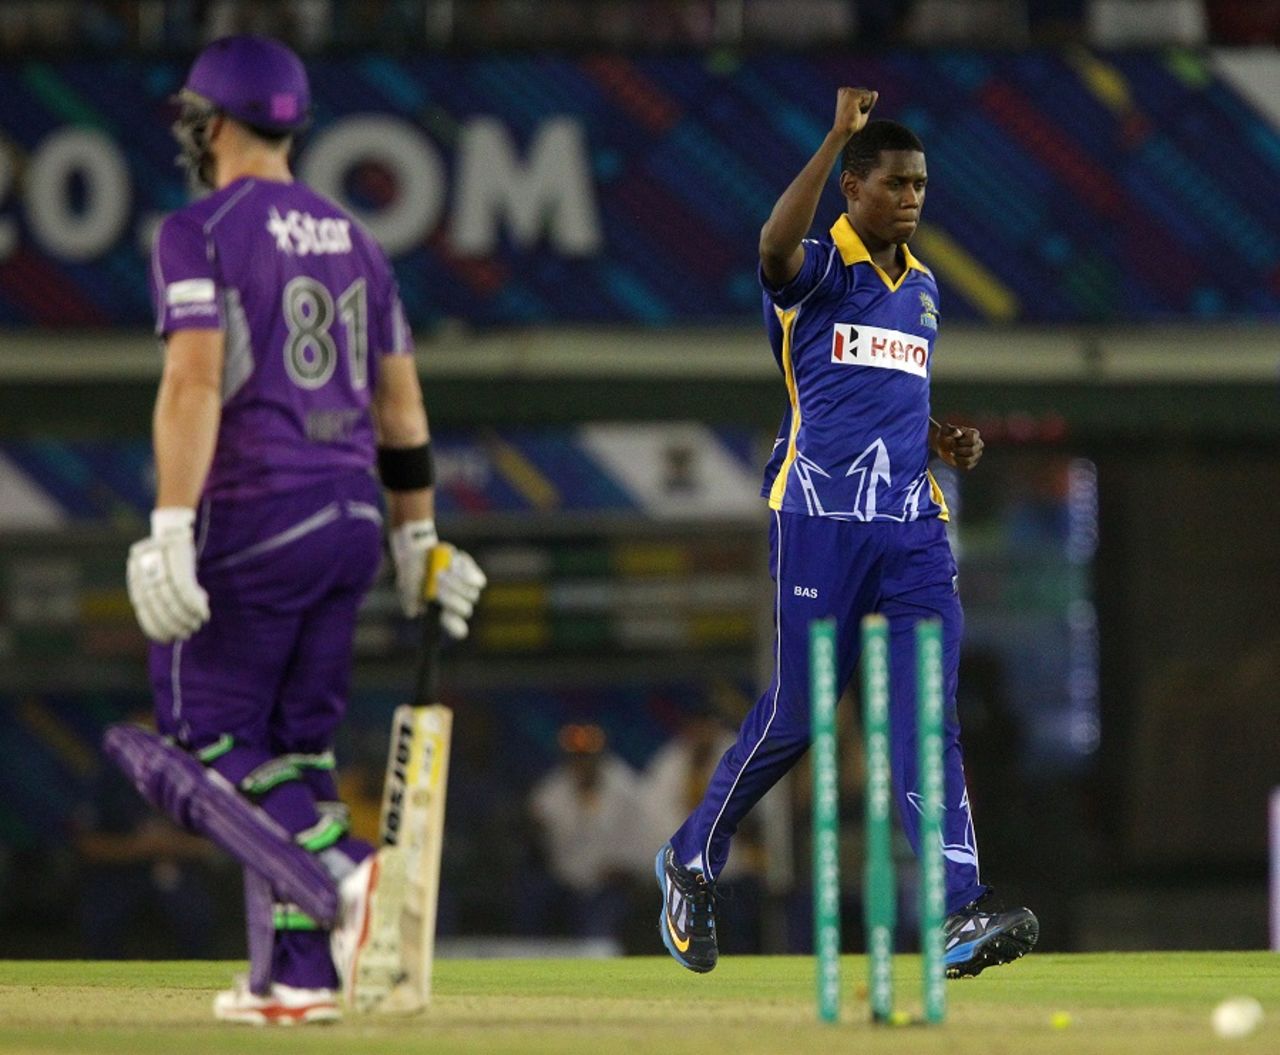 Akeal Hosein picked up a couple of wickets, Barbados Tridents v Hobart Hurricanes, Champions League T20, Mohali, September 28, 2014